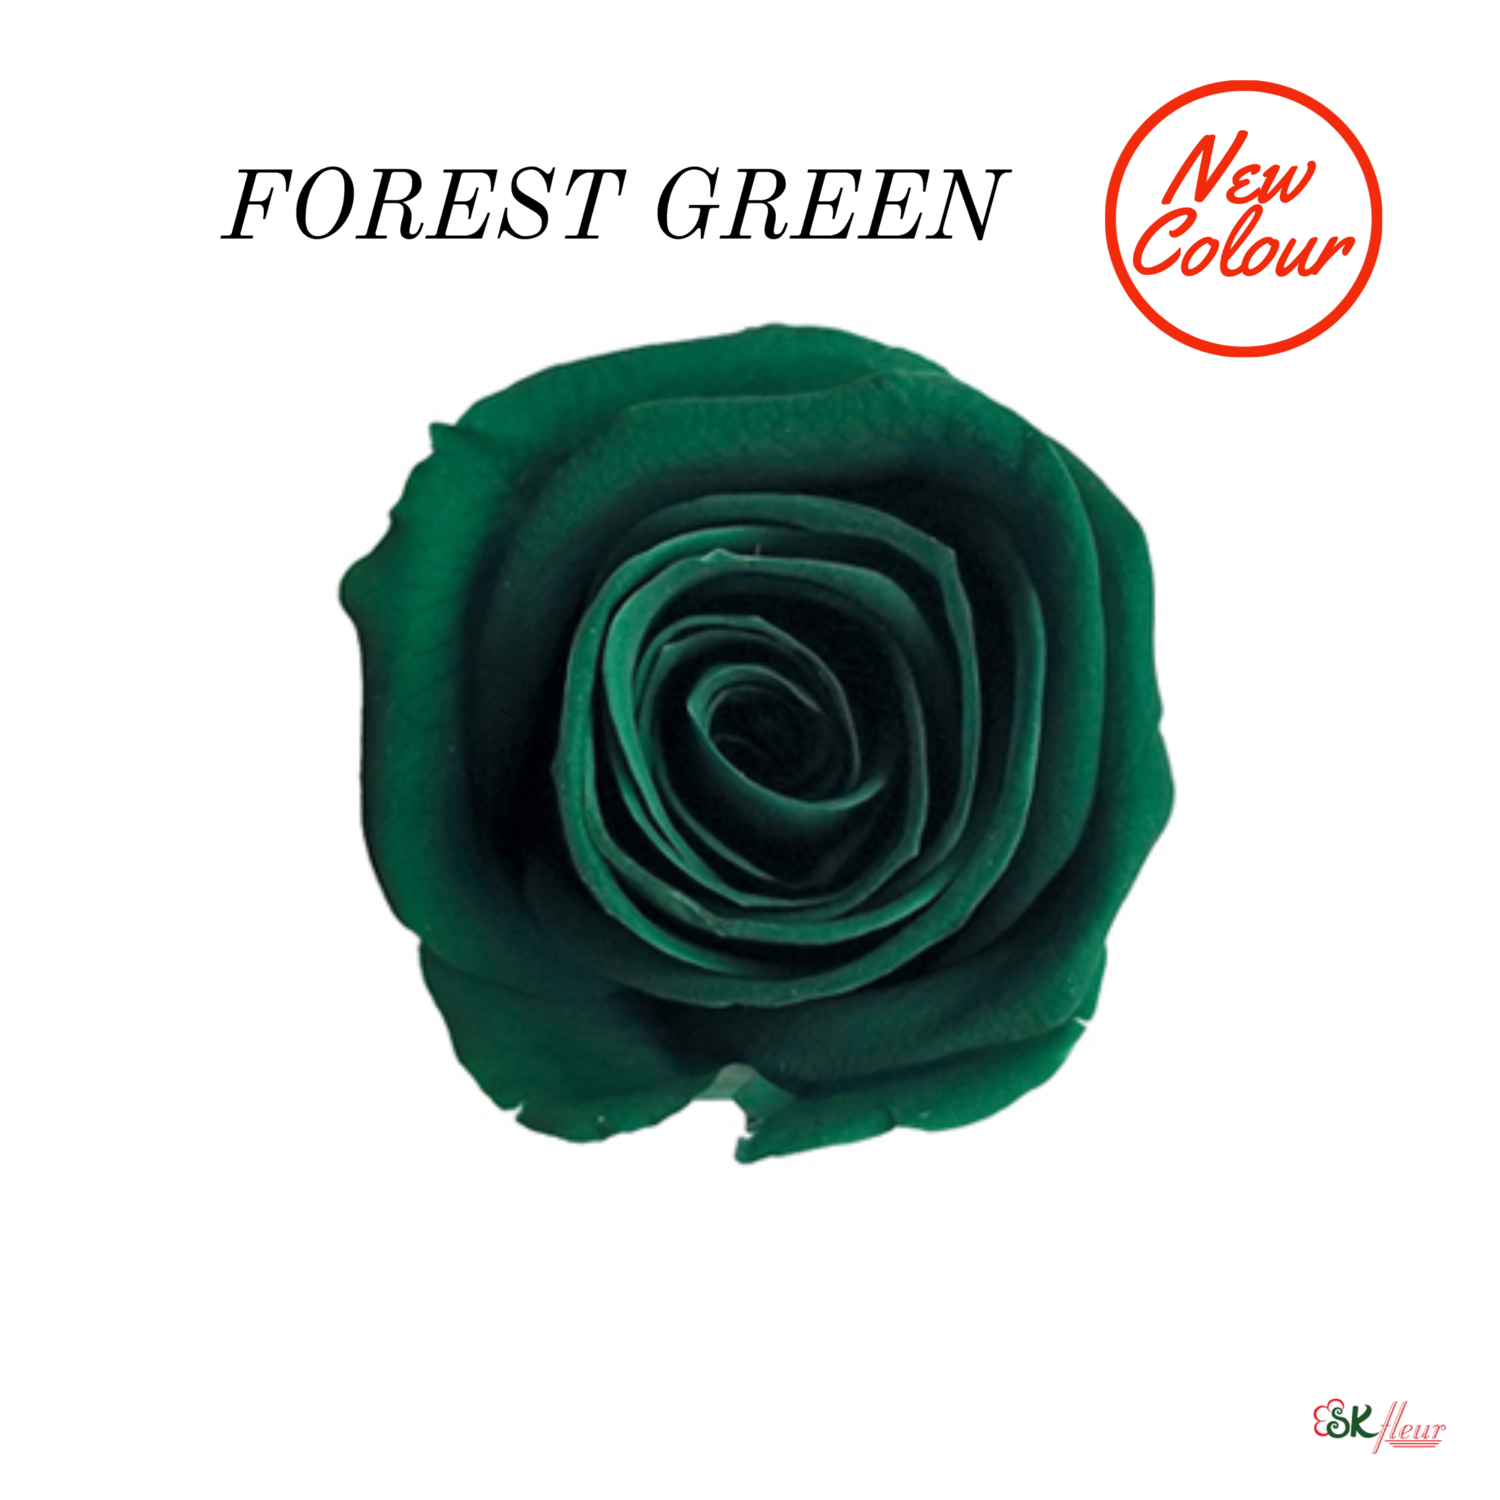 Piccola Blossom Rose / Forest Green